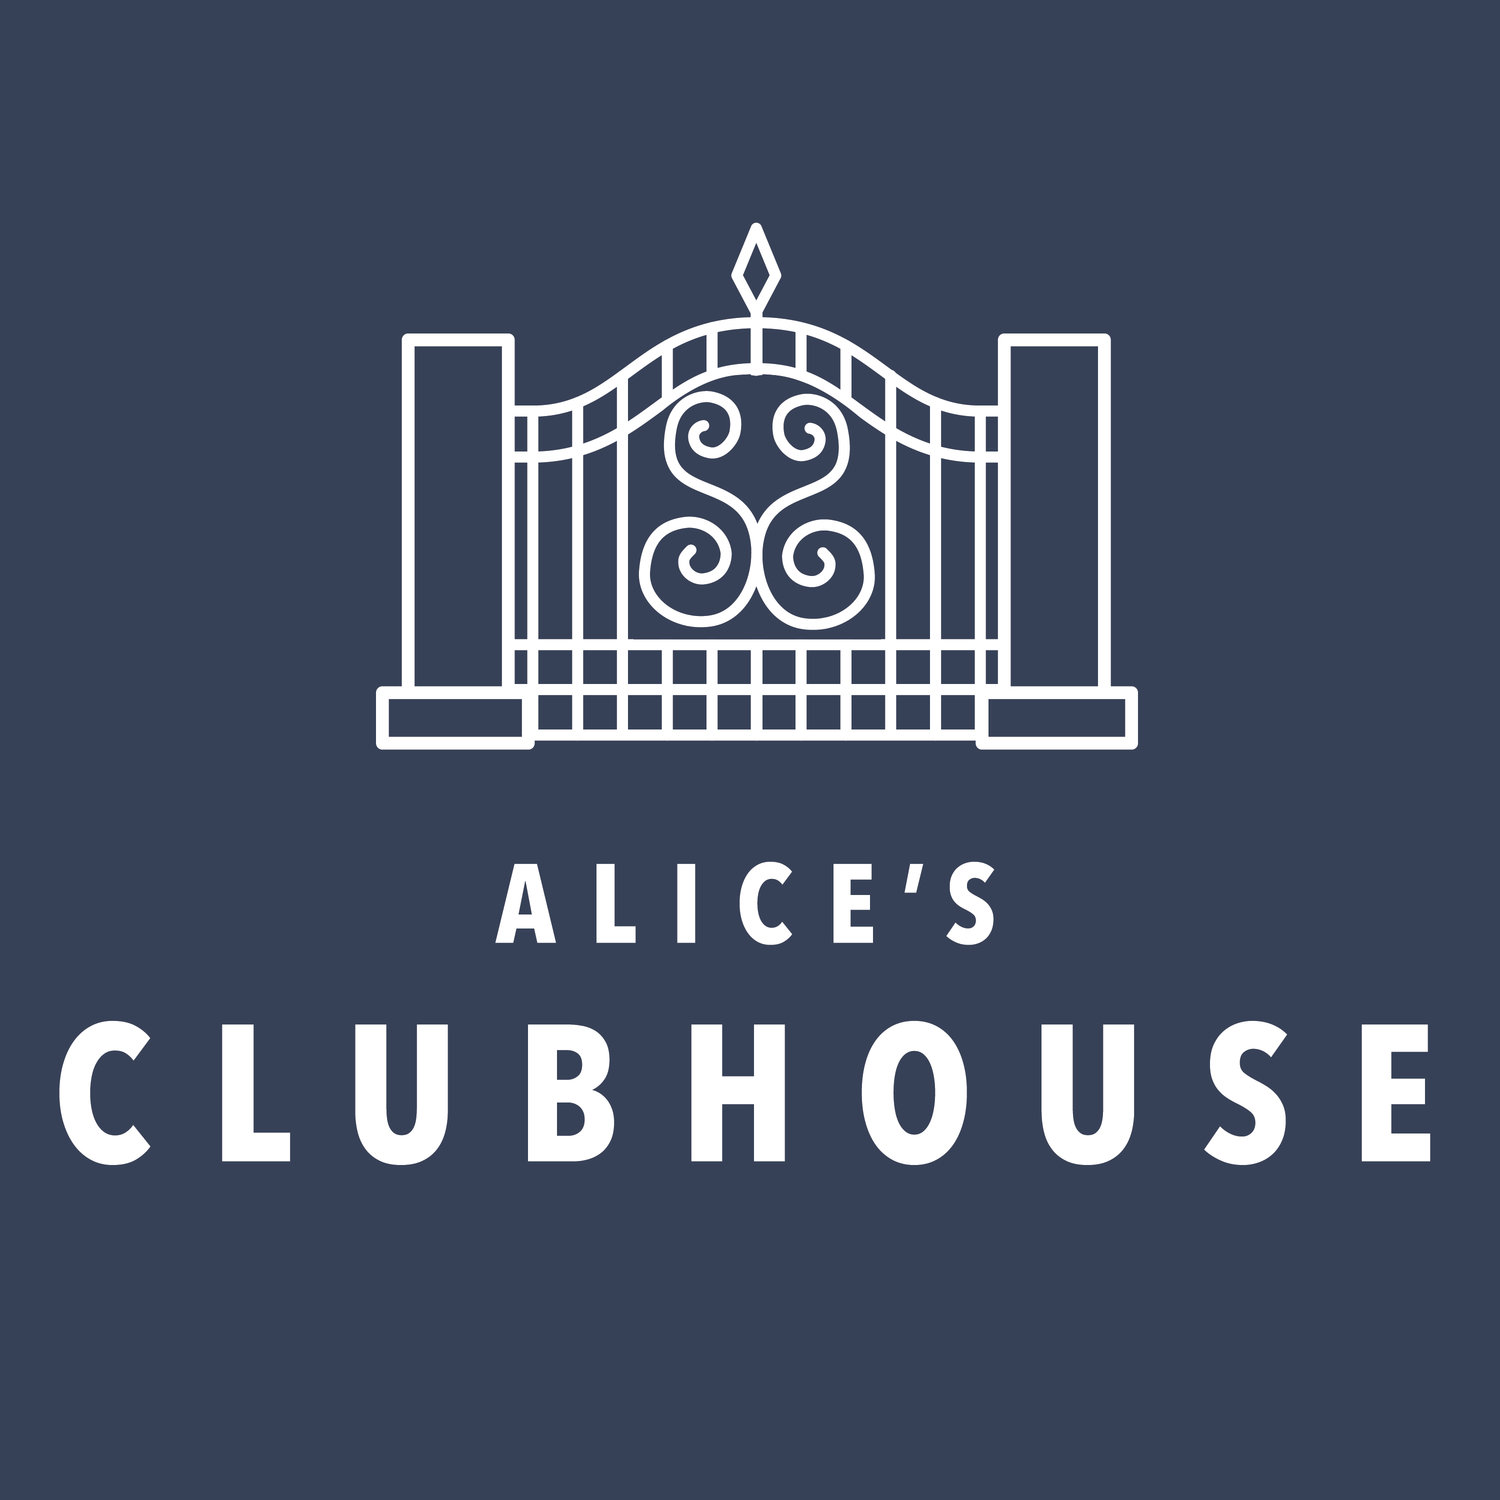 Alice's Clubhouse